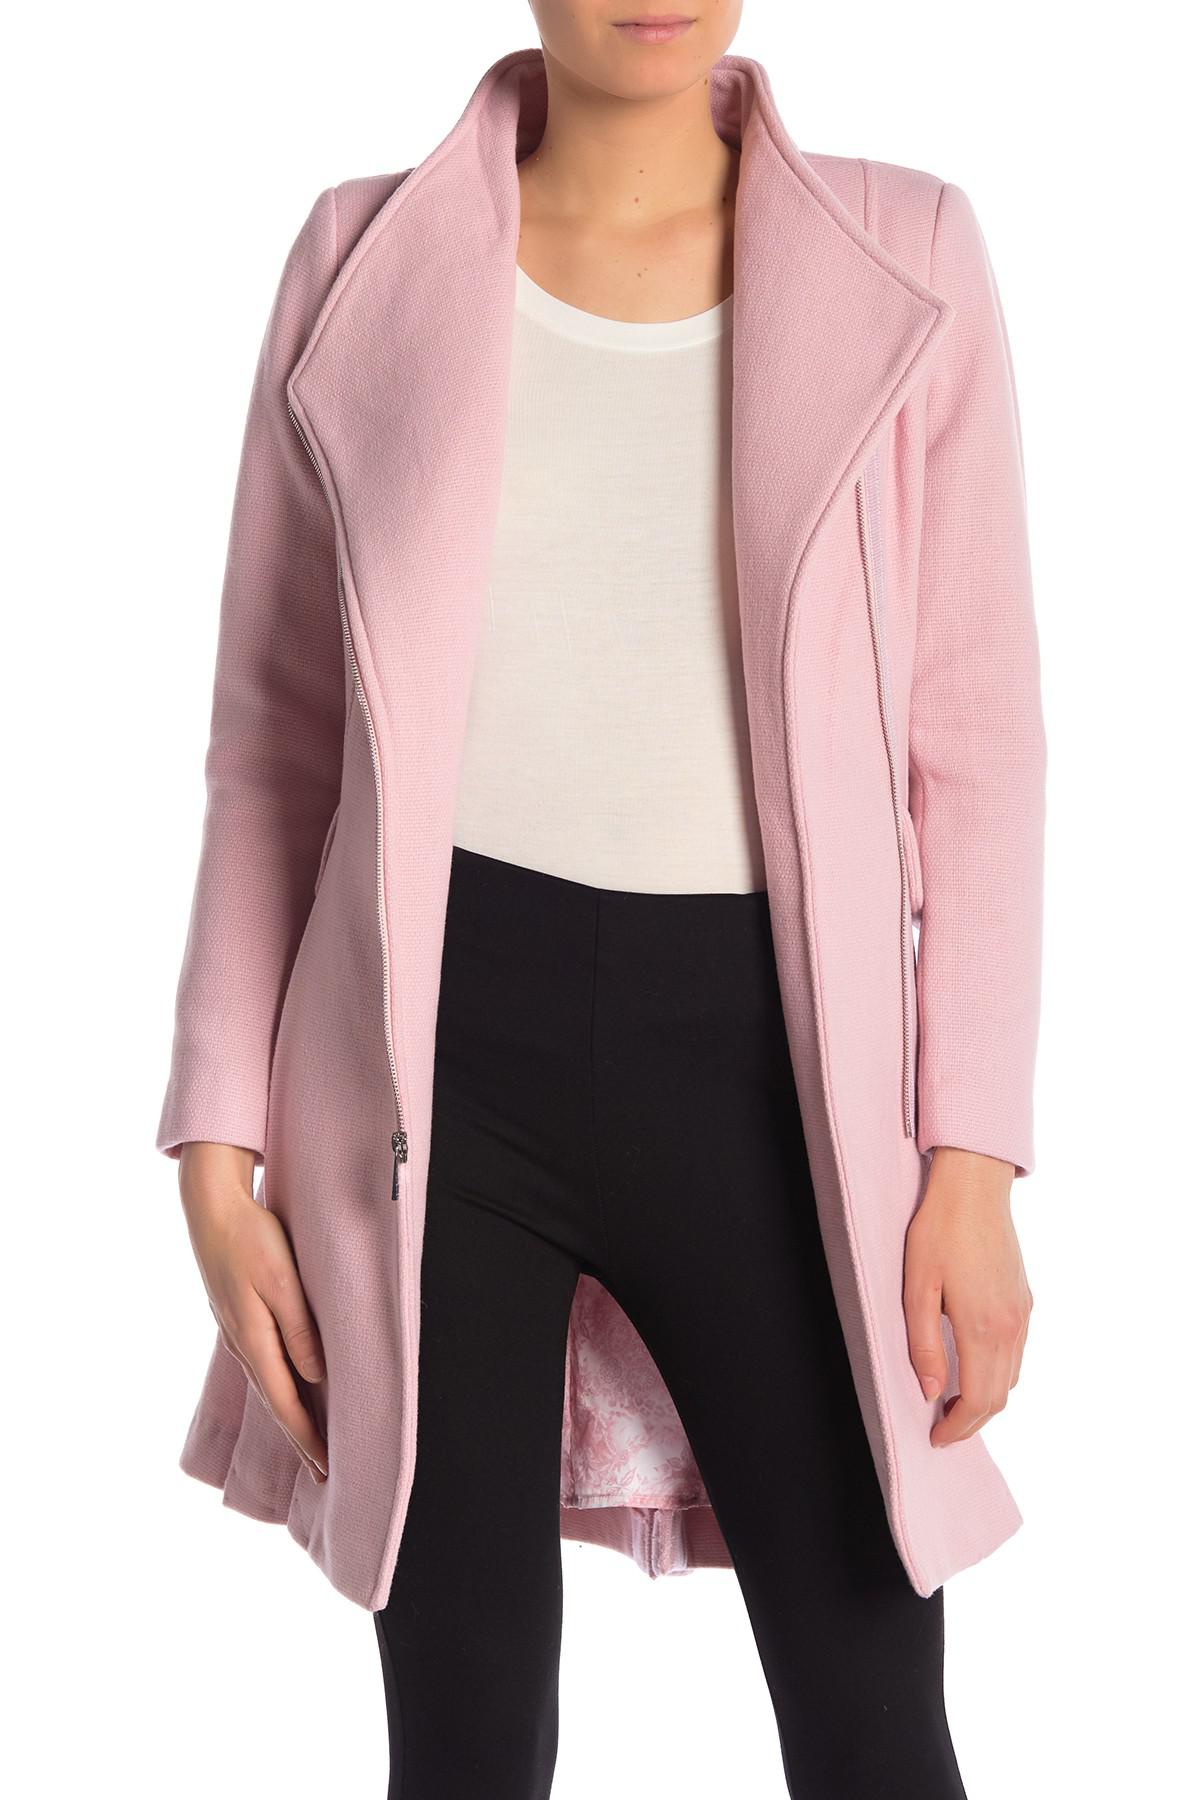 Guess Textured Wool Blend Skirted Walker Coat in Rose (Pink) - Lyst